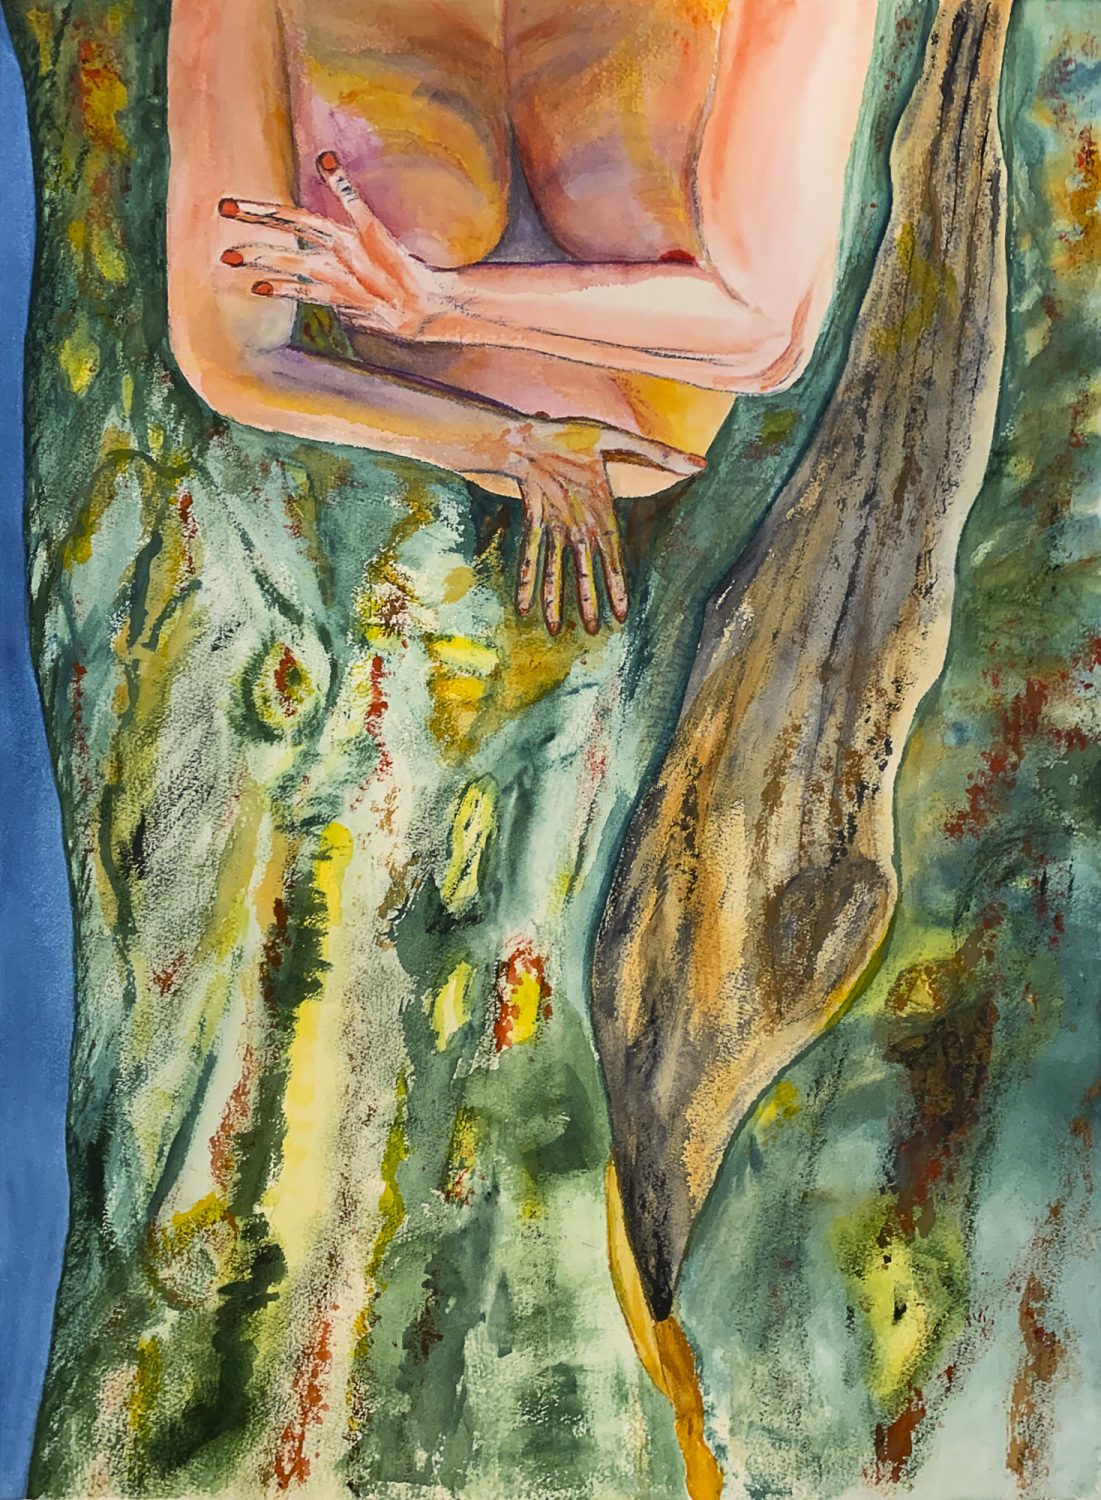 Painting of Topless Woman Emerging from a Tree